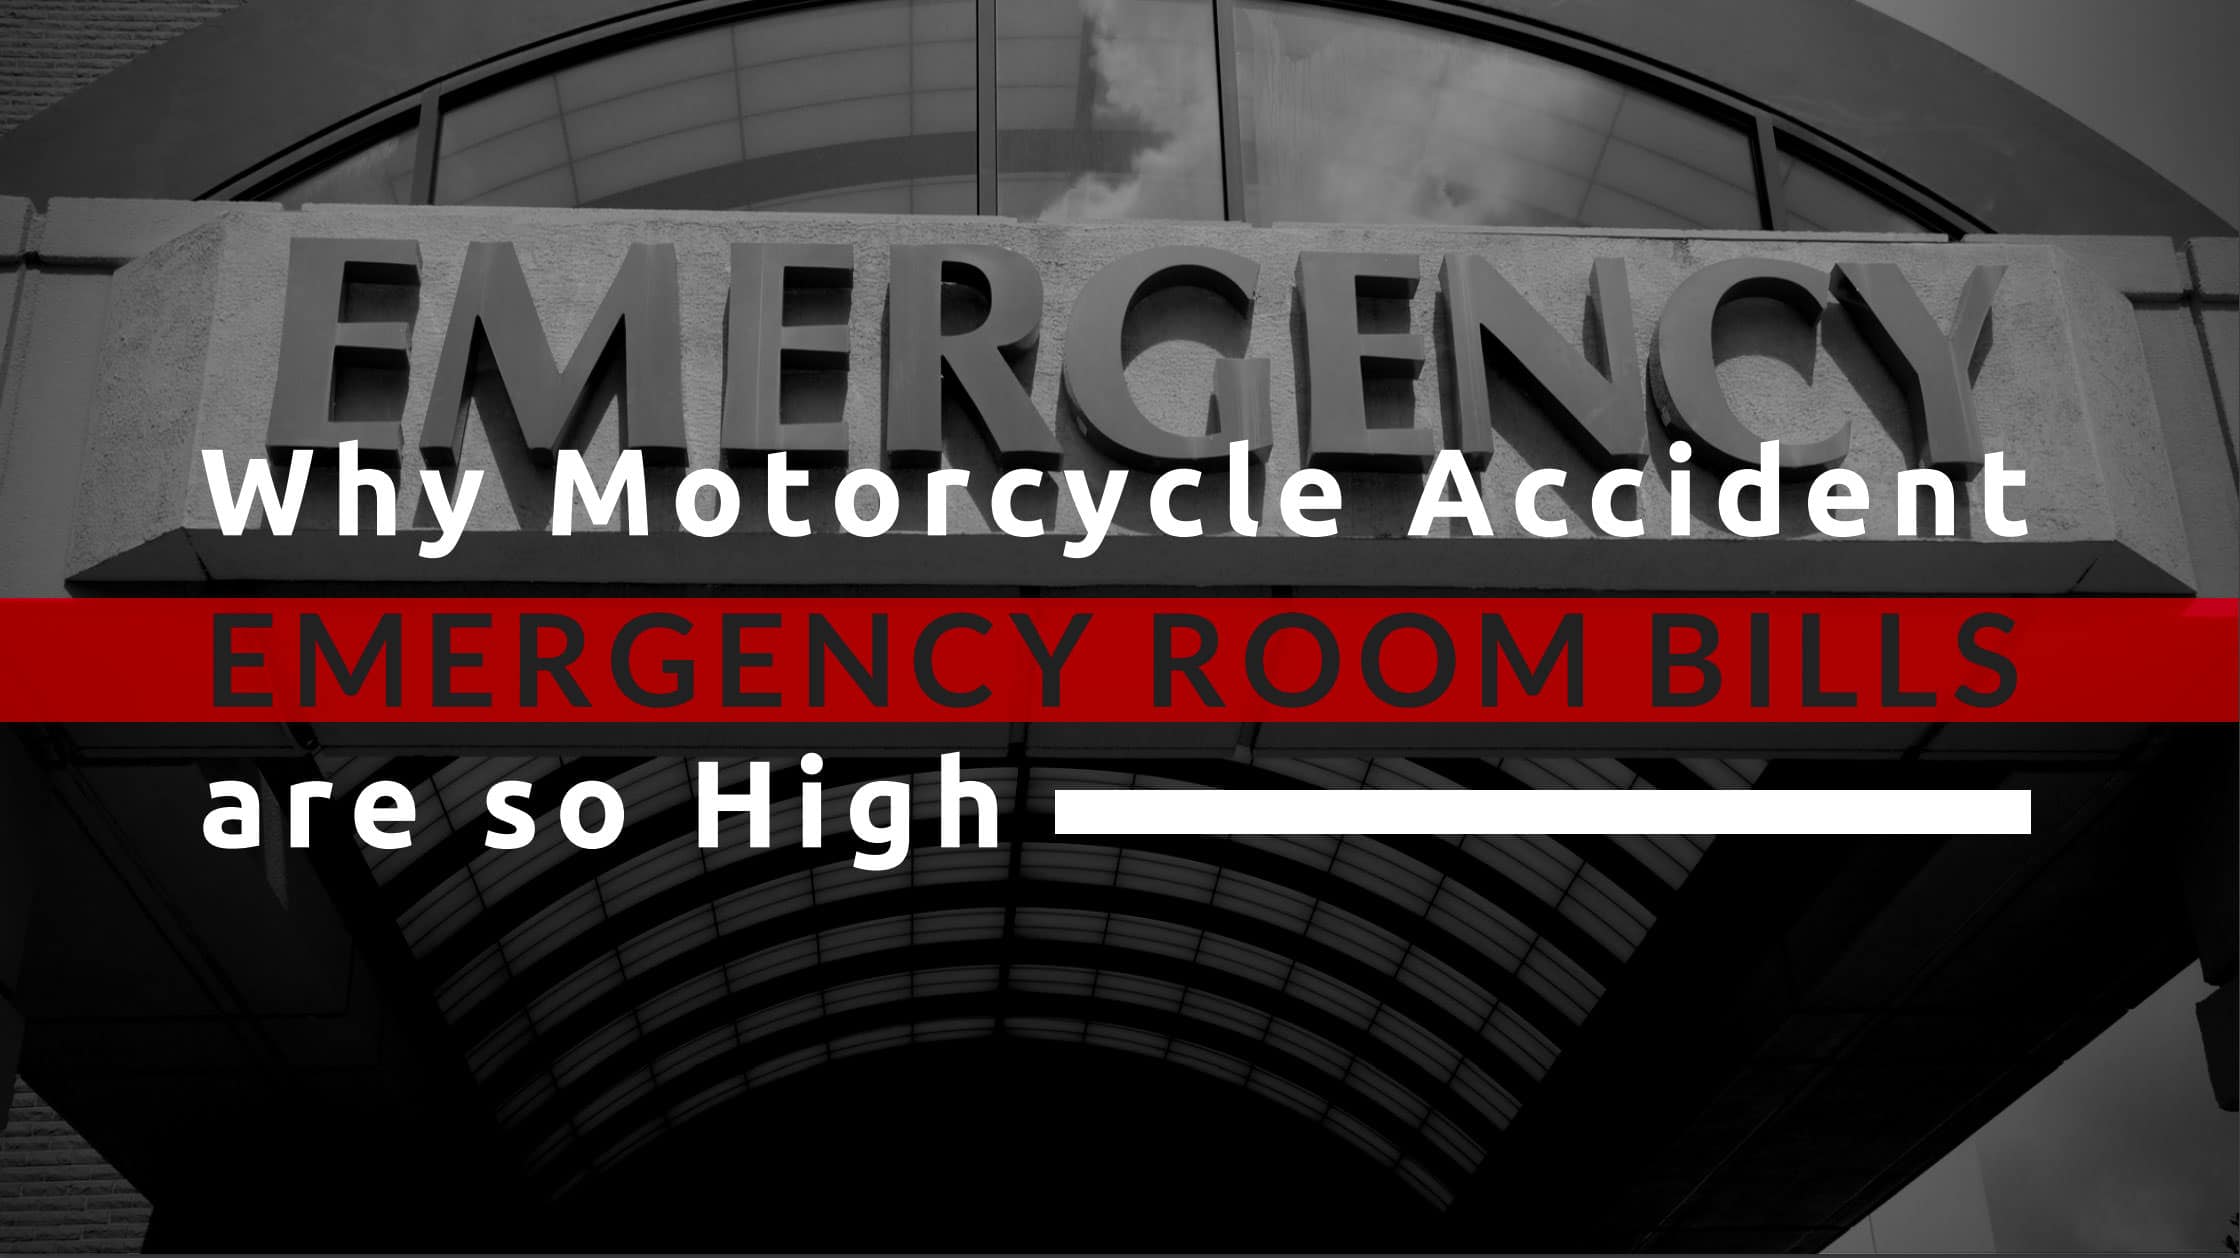 Why Motorcycle Accident Emergency Room Bills Are So High